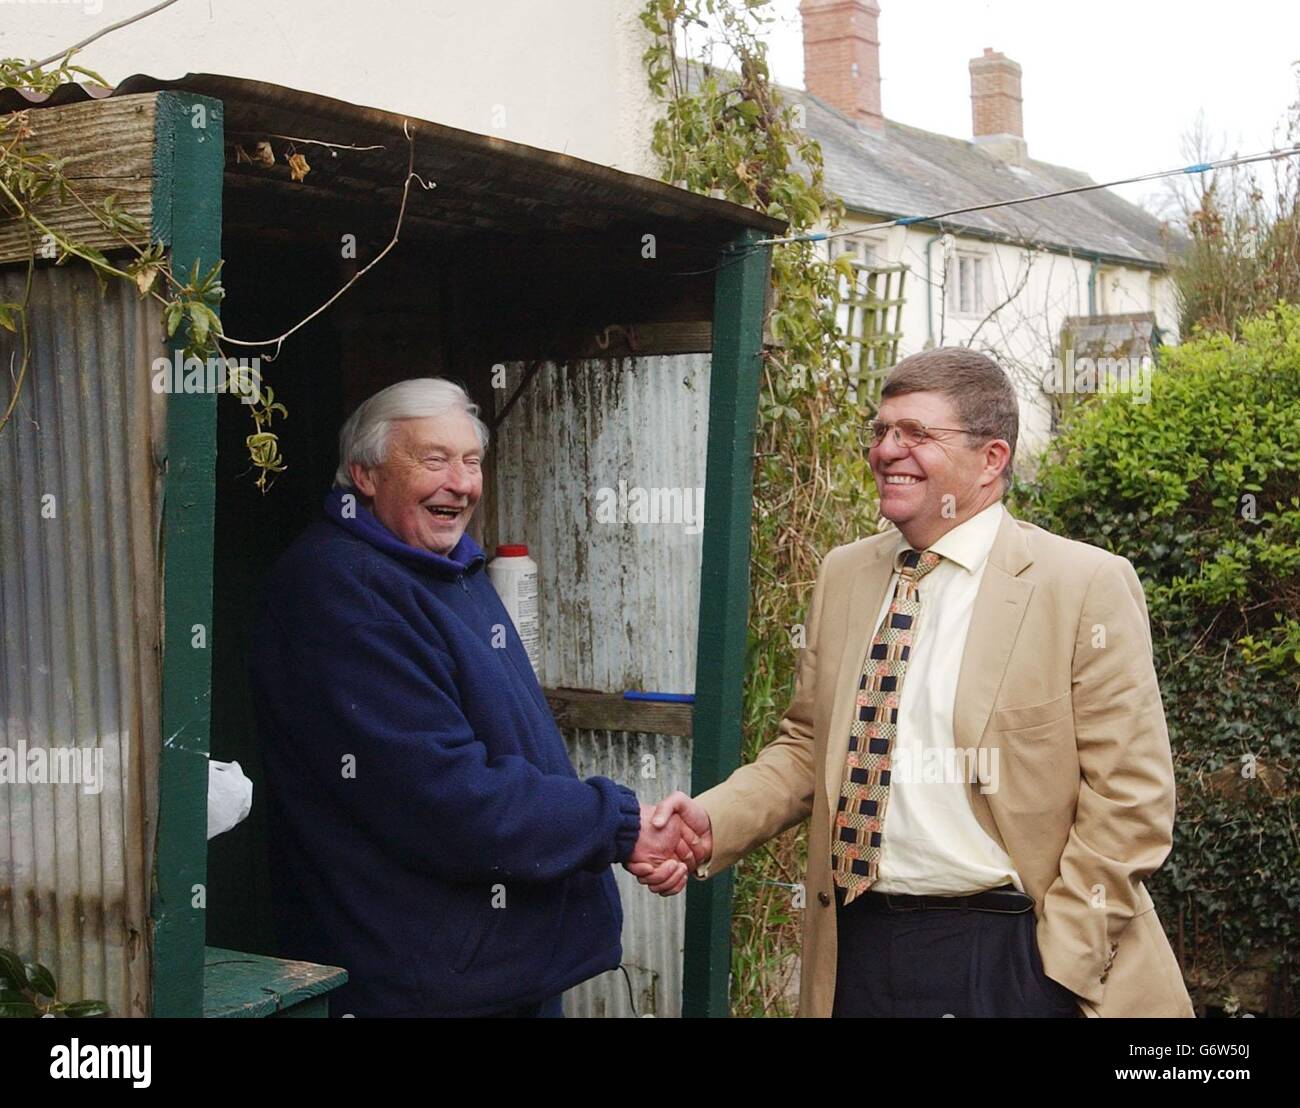 Canadian-born estate owner Richard Marker, 50, (right) shakes the hand of life-long village resident Sidney Phillips, 71, after a buyer was found for the village properties. Fifteen homes in Gittisham, East Devon, will be sold to Northumberland and Durham Property Trust. A further nine houses will be sold to tenants. Stock Photo